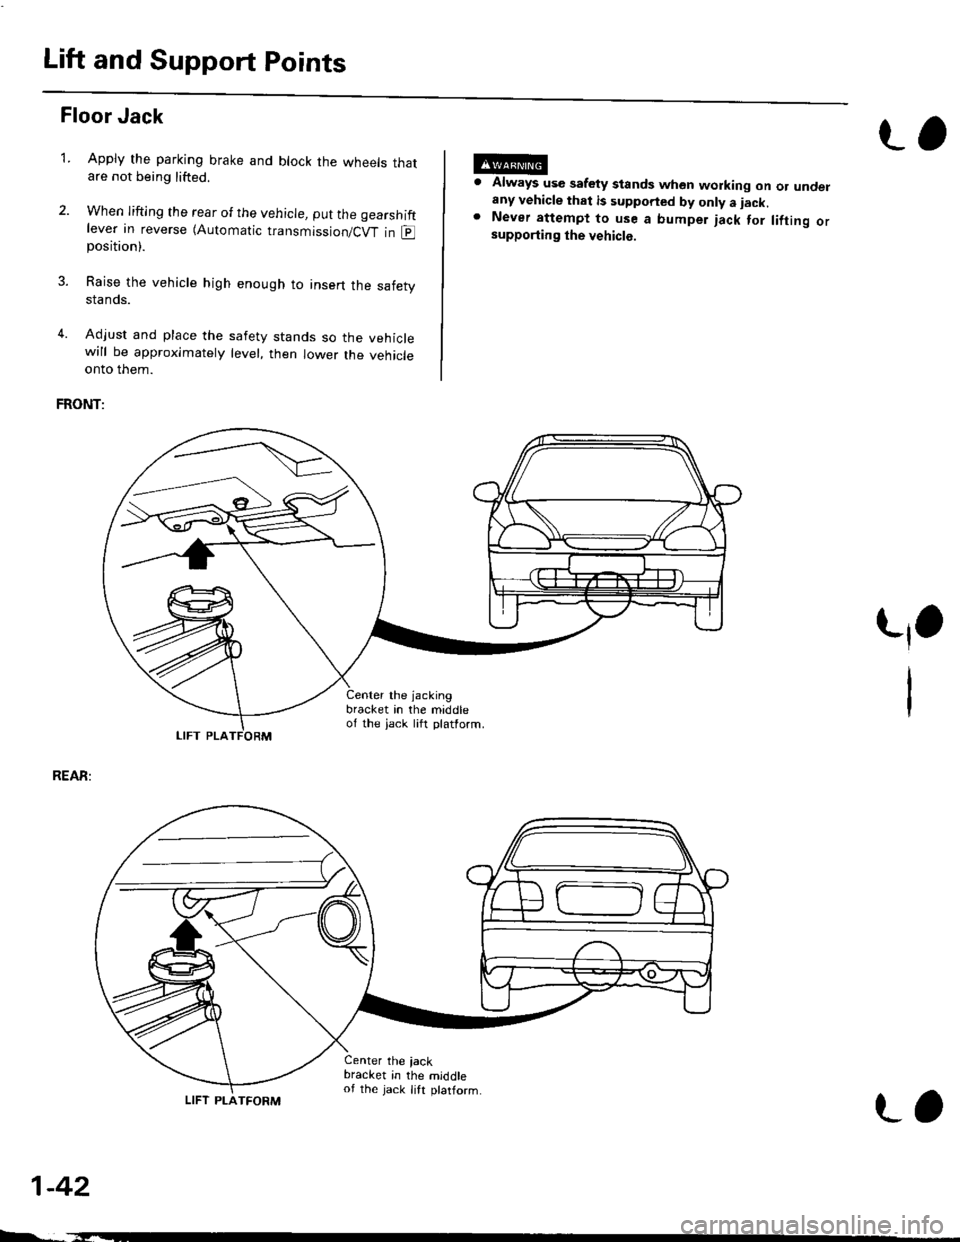 HONDA CIVIC 1996 6.G Service Manual Lift and Support Points
Floor Jack
Apply the parking brake and block the wheets thatare not being lifted.
When lifting the rear of the vehicle, put the gearshiftlever in reverse (Automatic transmissio